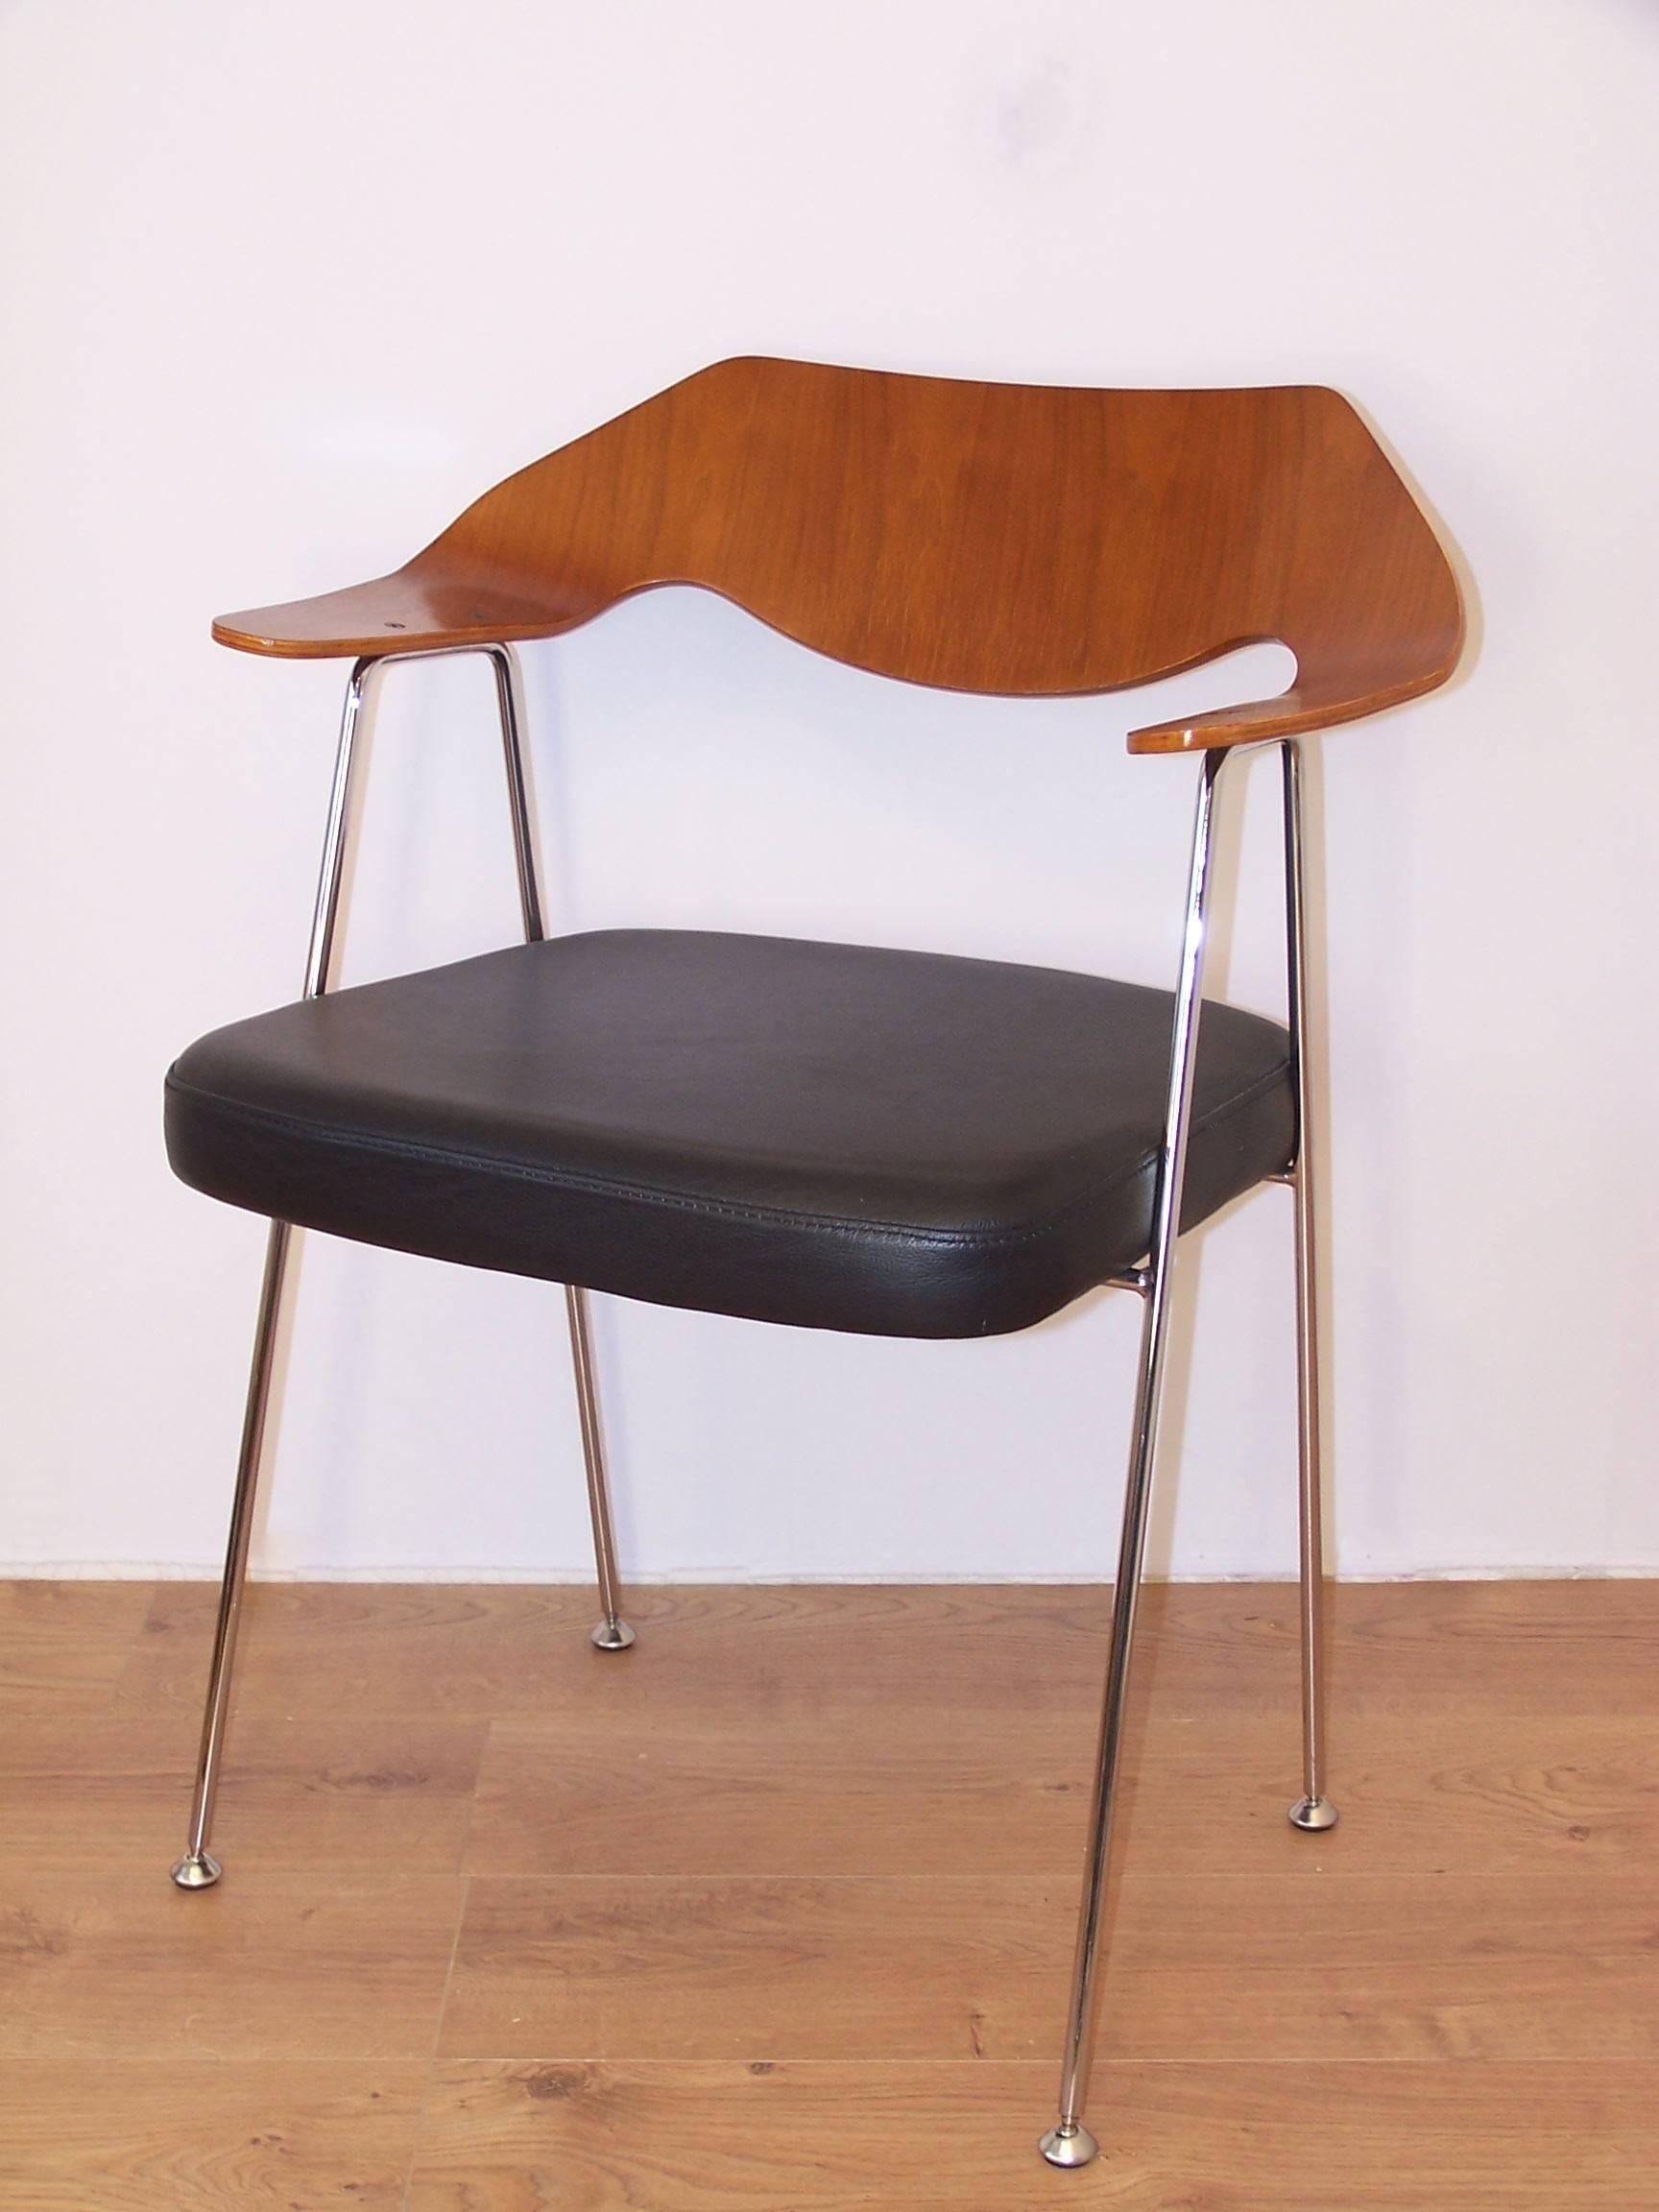 European Robin Day Chair with Armrests from the 1950s